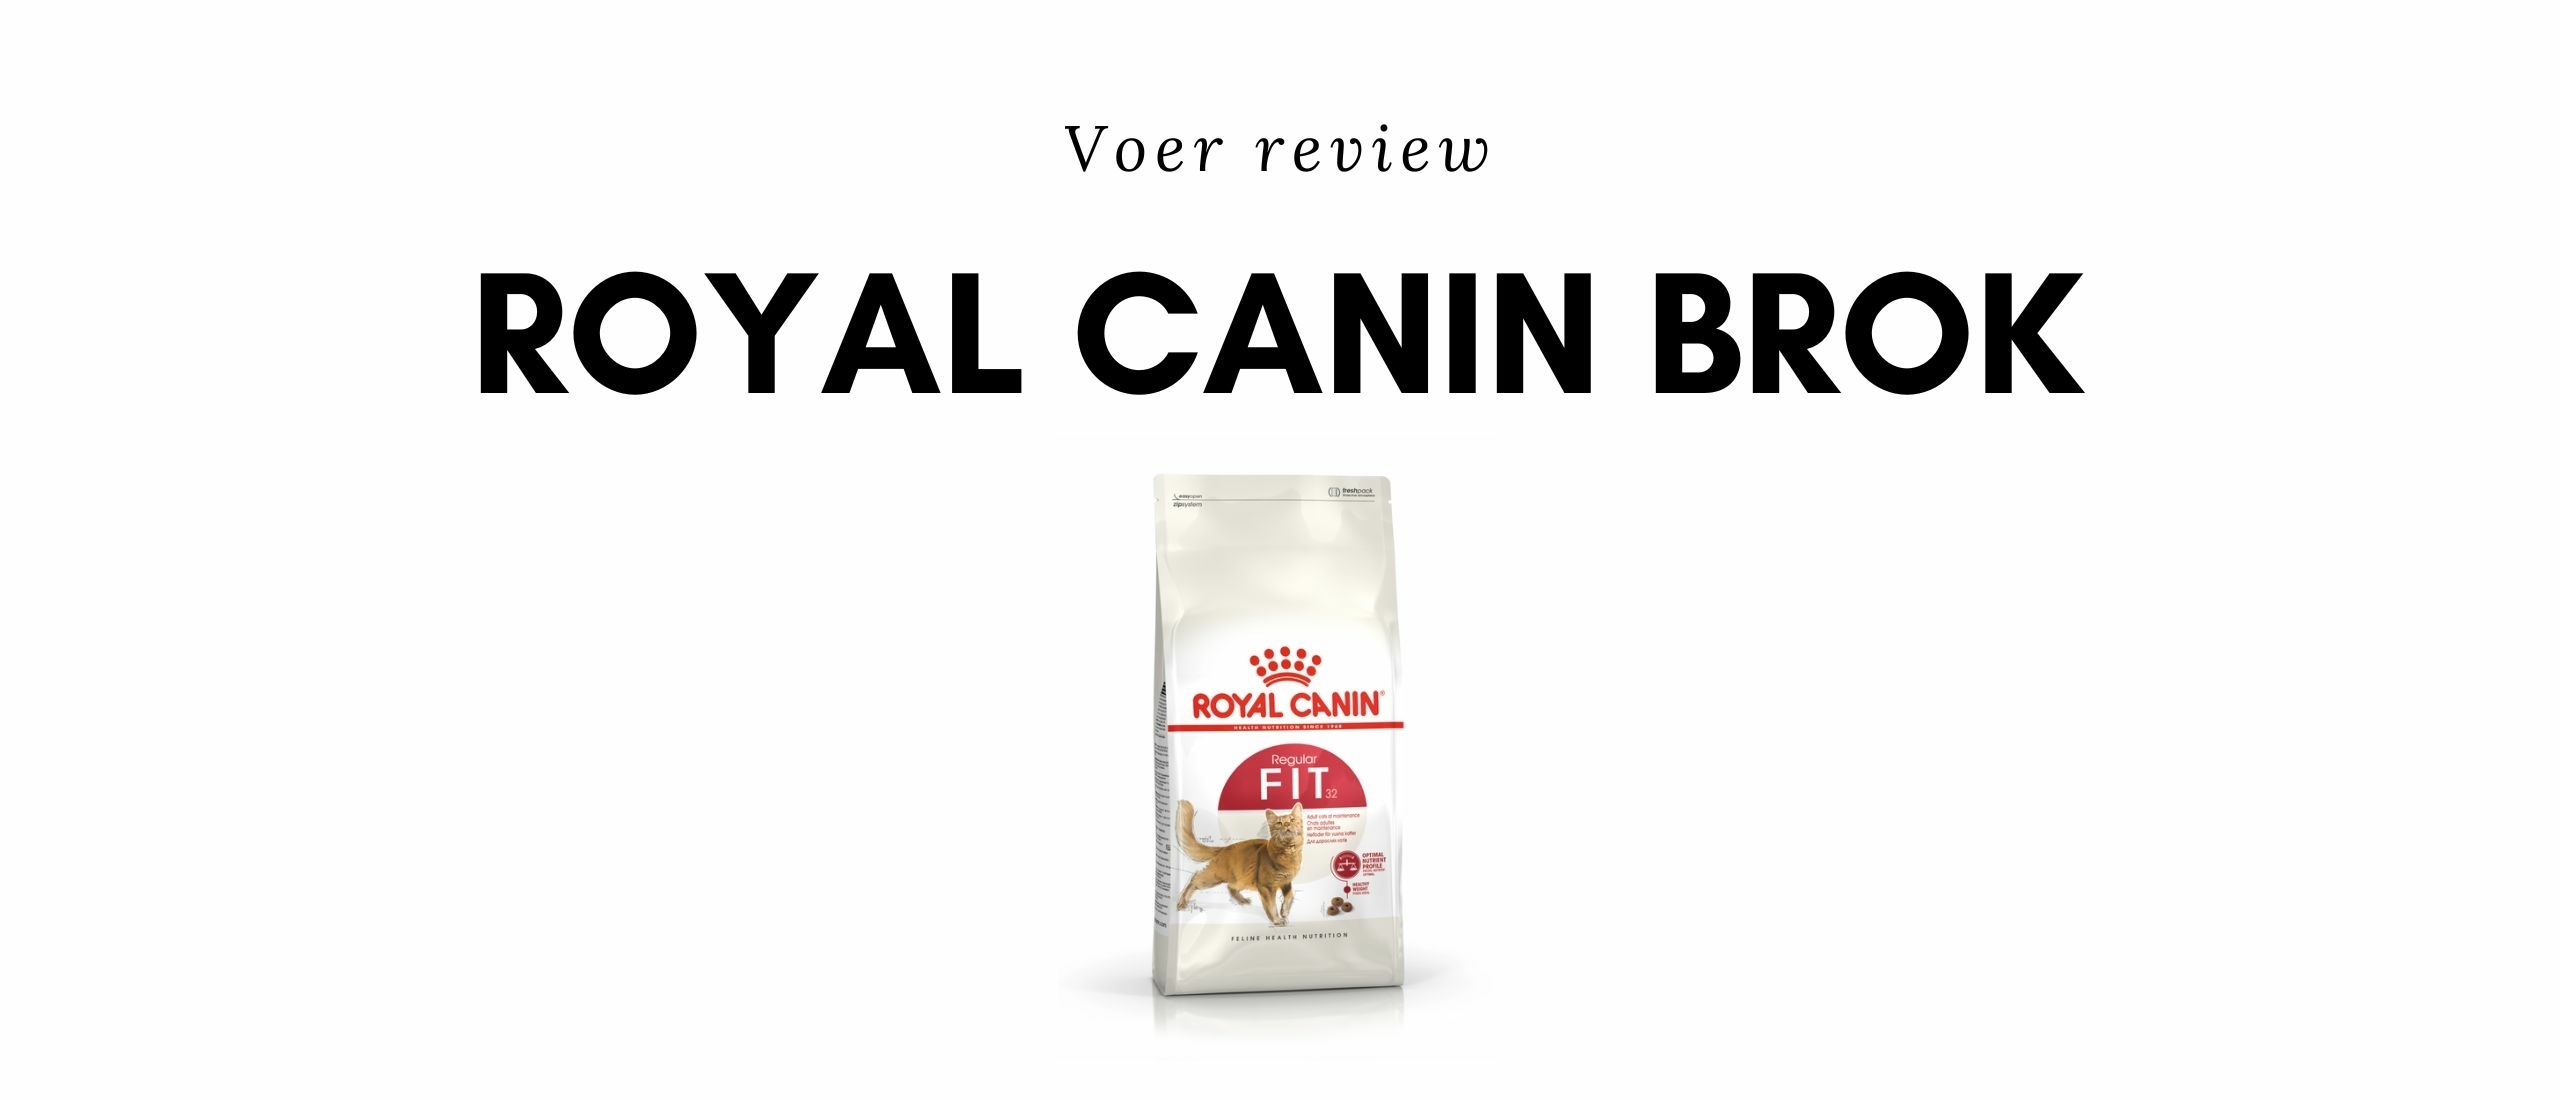 Voer review Royal Canin Brok